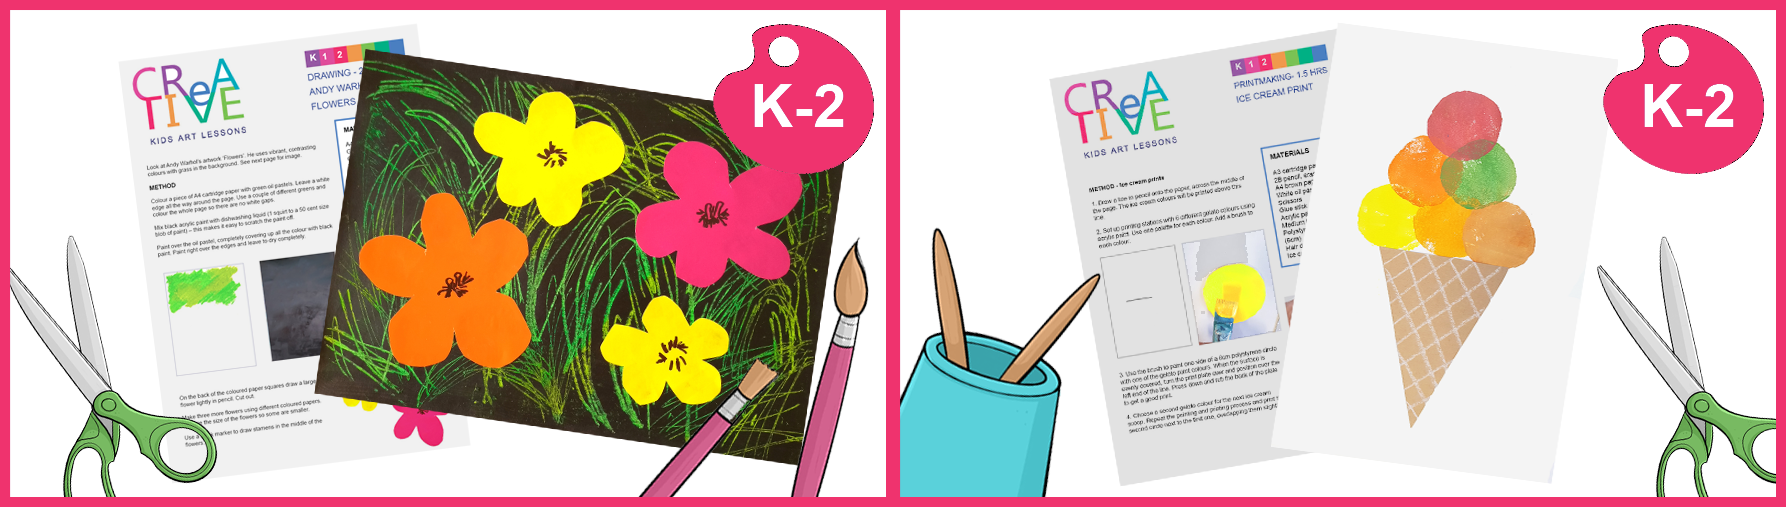 Lesson plans for kindergarten, grade 1 and grade 2 from the 'Andy Warhol' unit